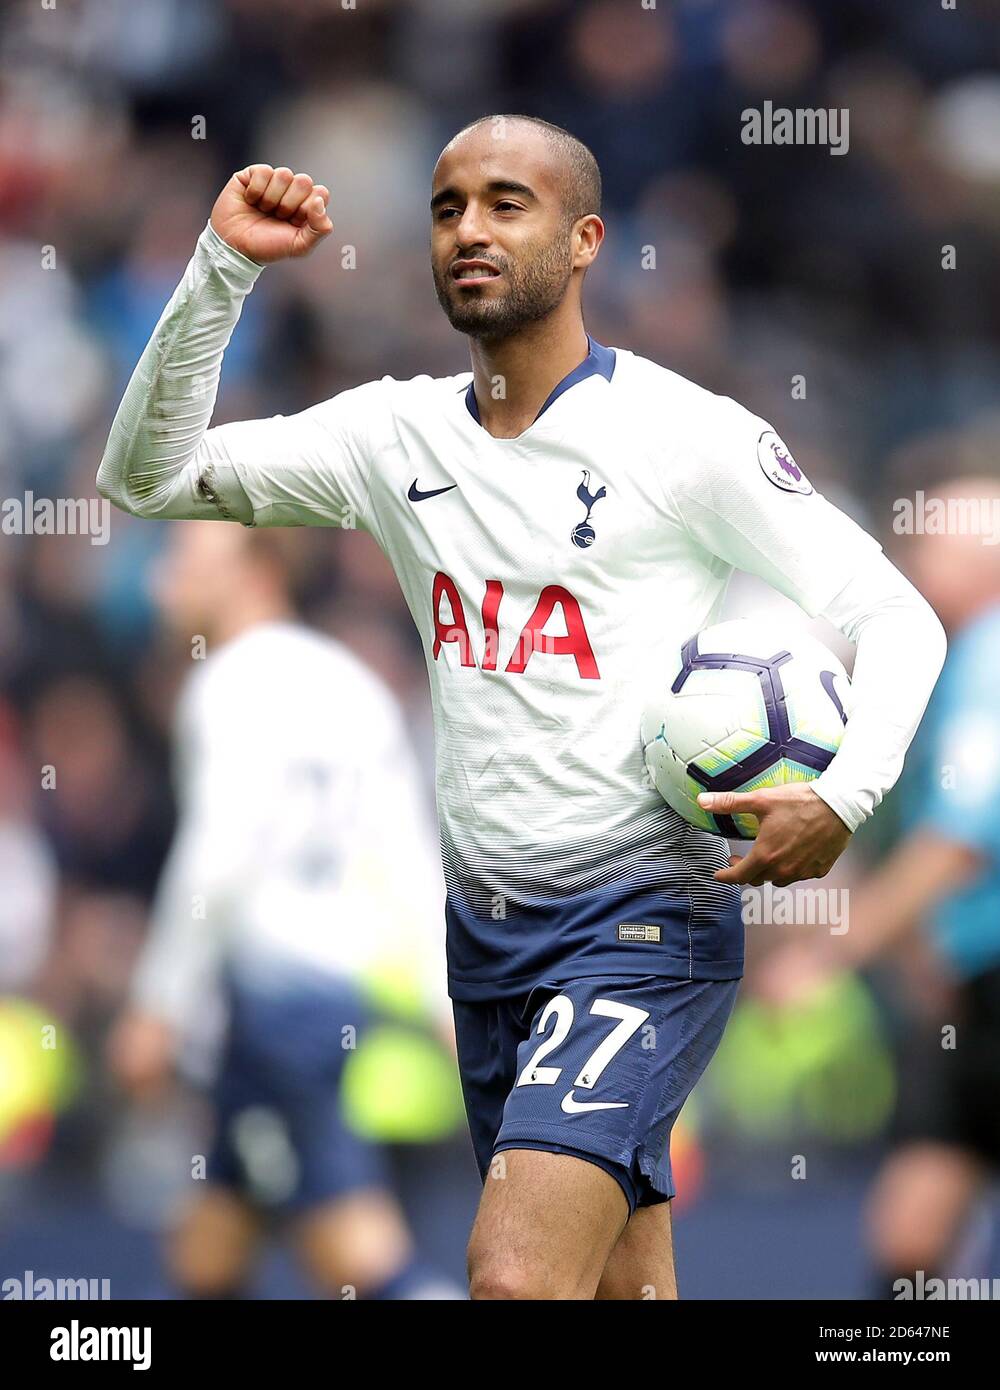 Tottenham Hotspur's Lucas Moura celebrates with the match ball after scoring a hat-trick after the final whistle Stock Photo